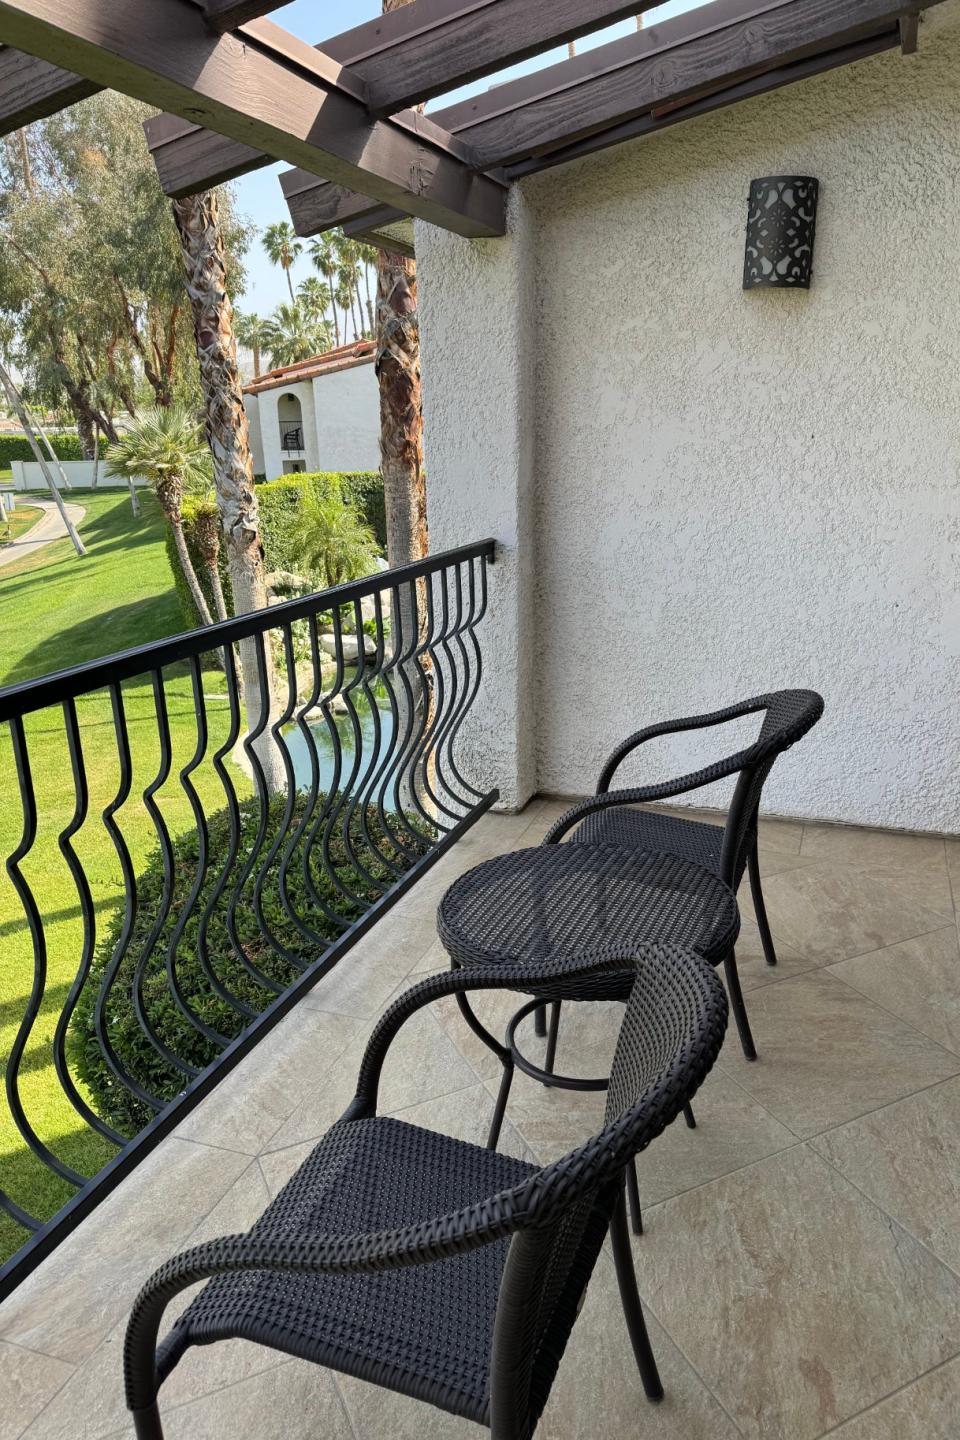 Balcony with two chairs overlooking a landscaped area, suggesting a relaxing spot at a travel destination